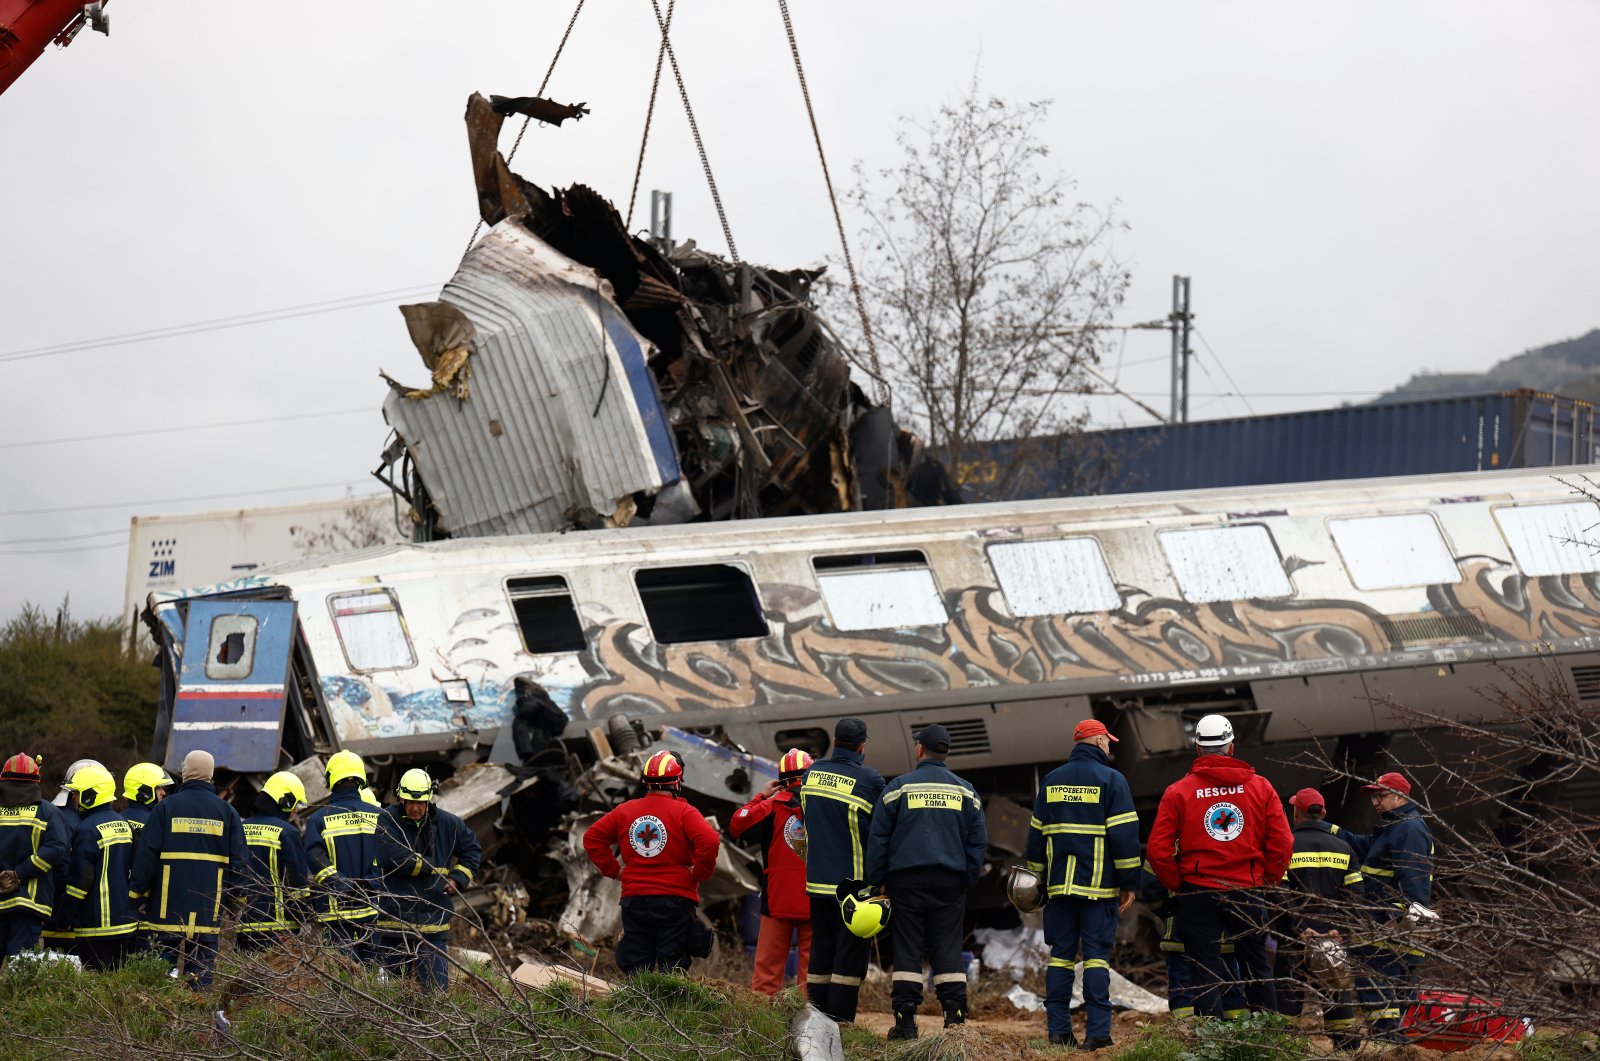 At least 36 killed, 85 injured in Greece train accident